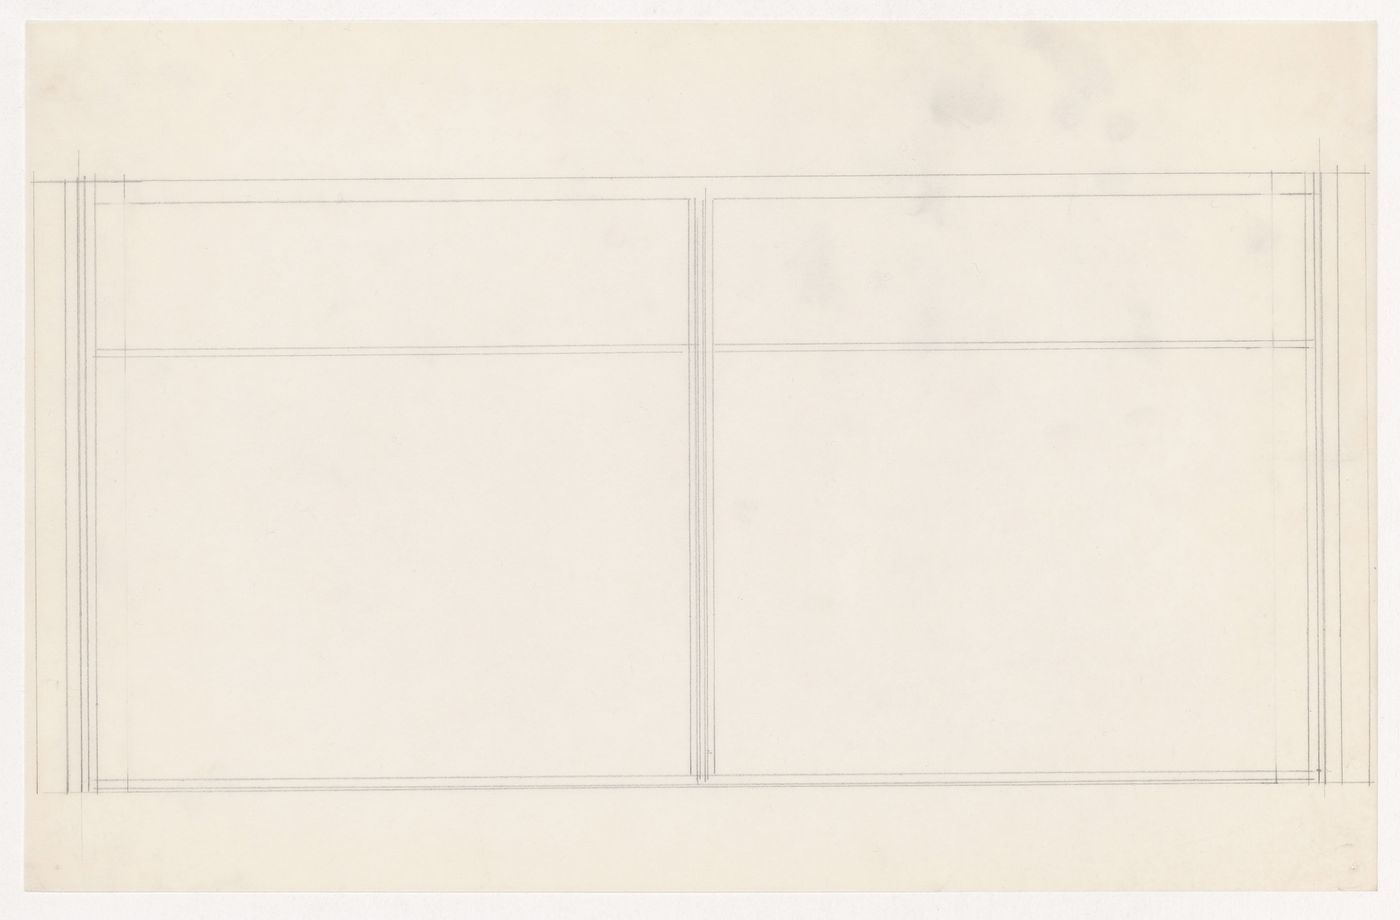 Partial elevation for windows for the Metallurgy Building, Illinois Institute of Technology, Chicago